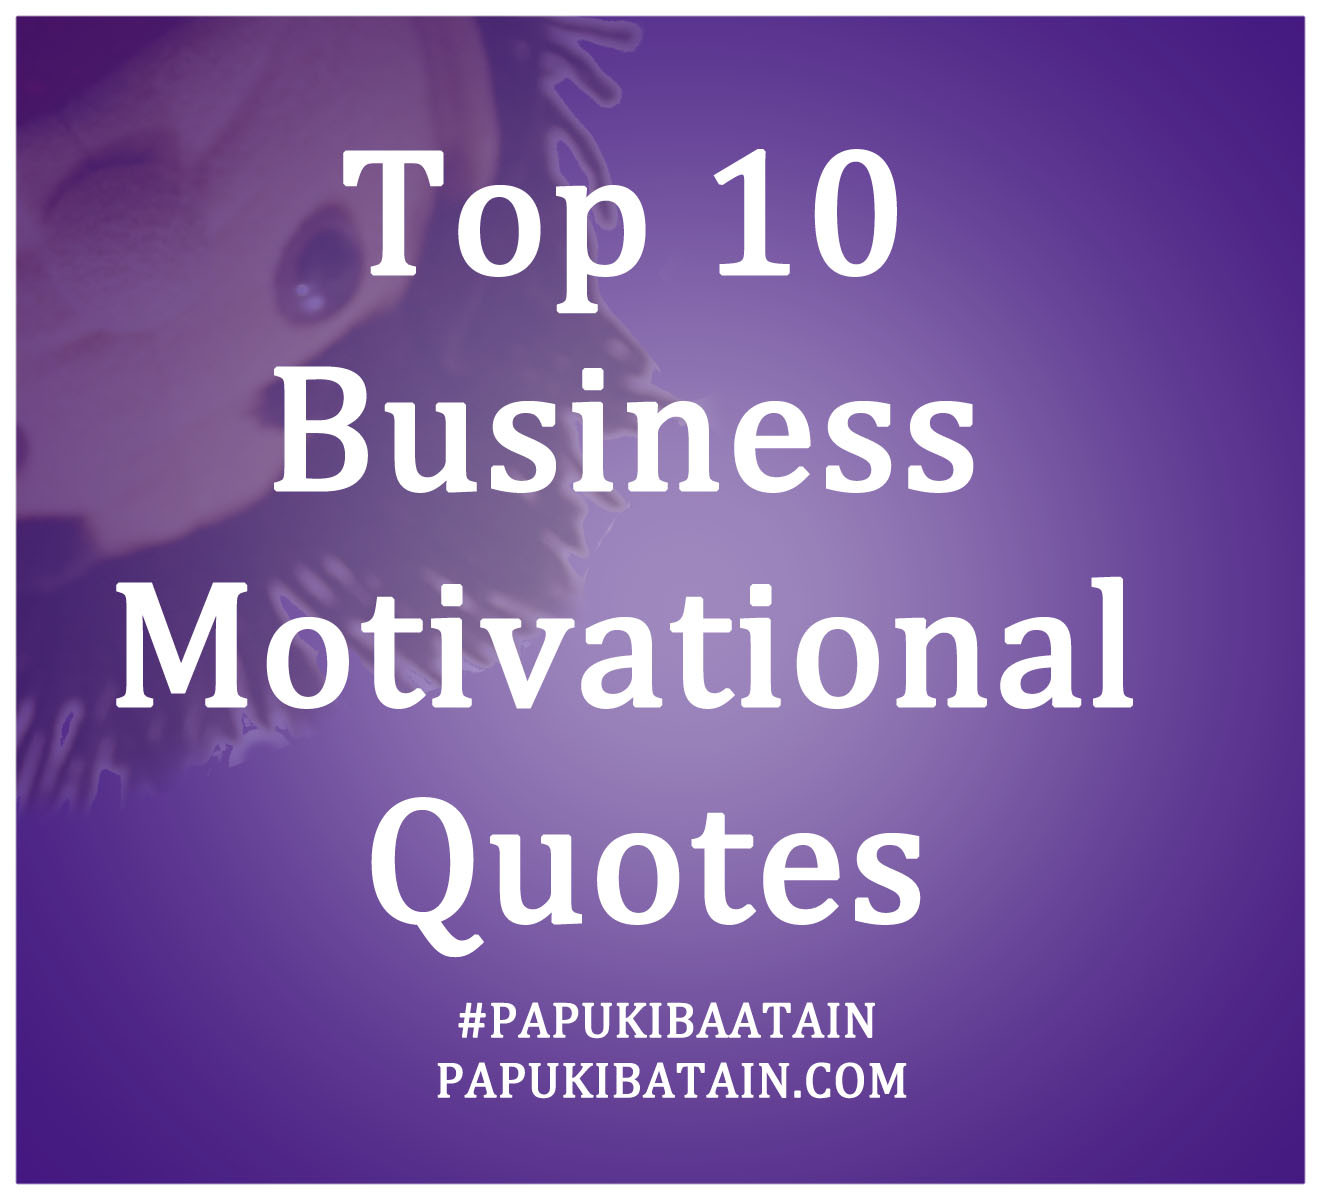 Inspirational Quotes For Business
 Top 10 Business Quotes QuotesGram